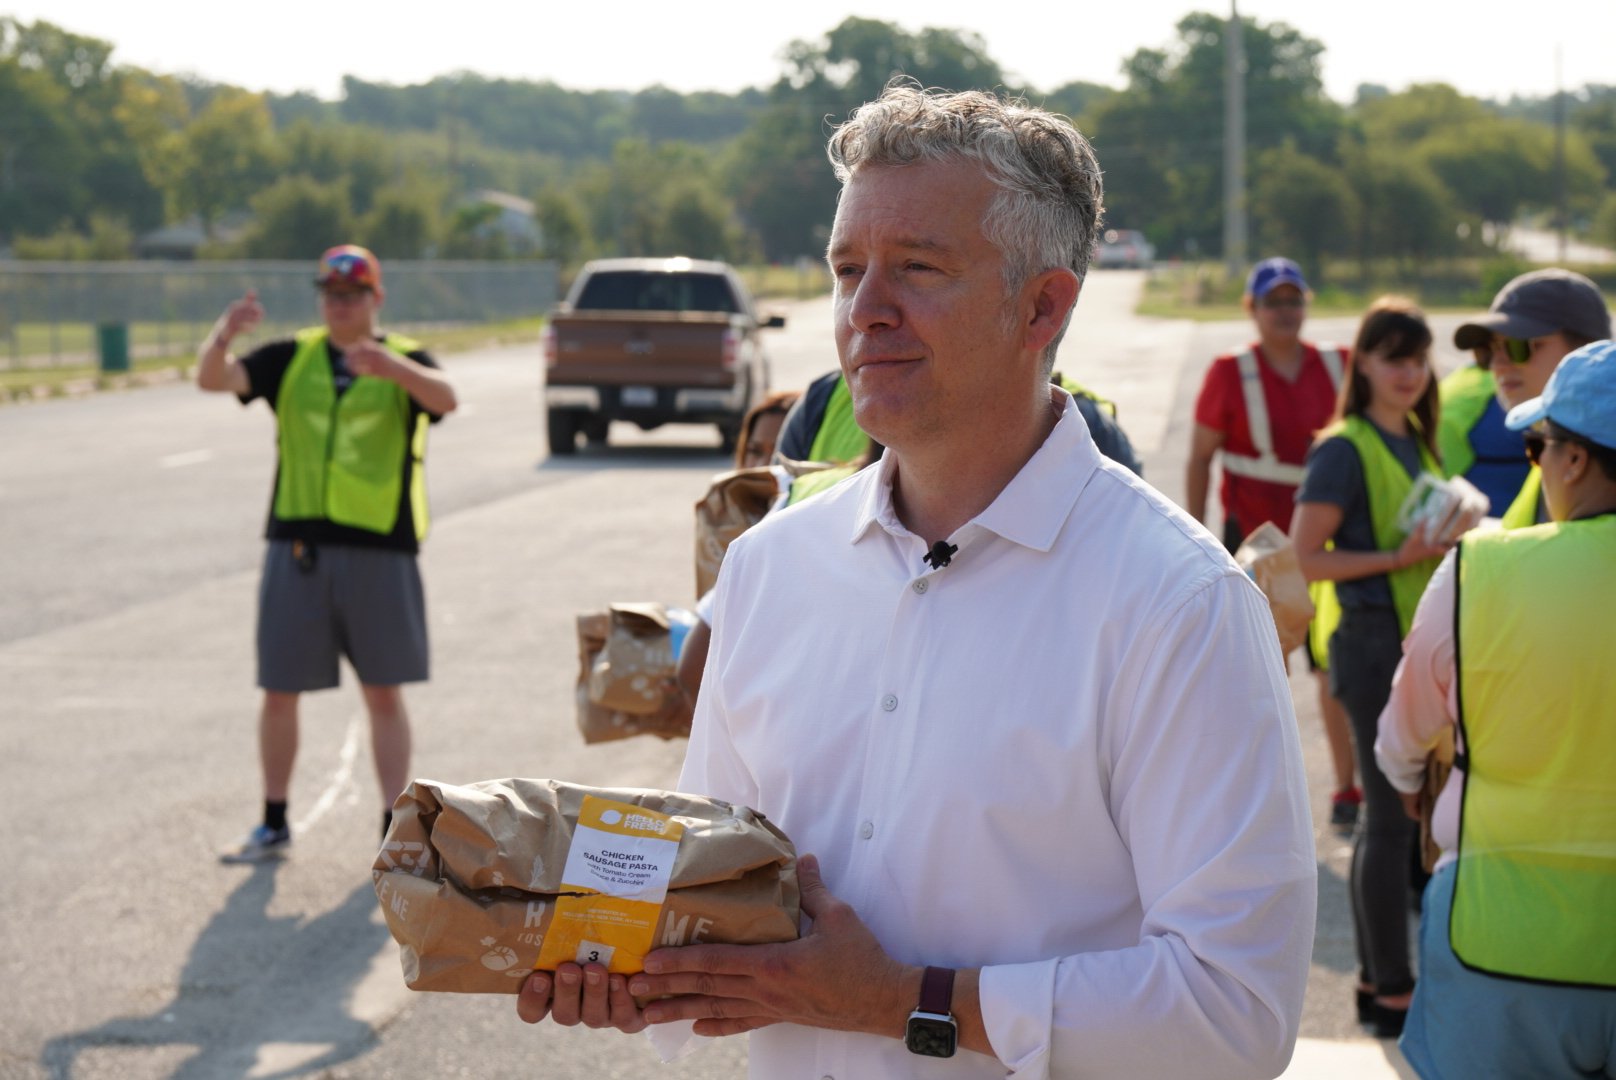 Jeff delivers Meals with Meaning kits to those in need.